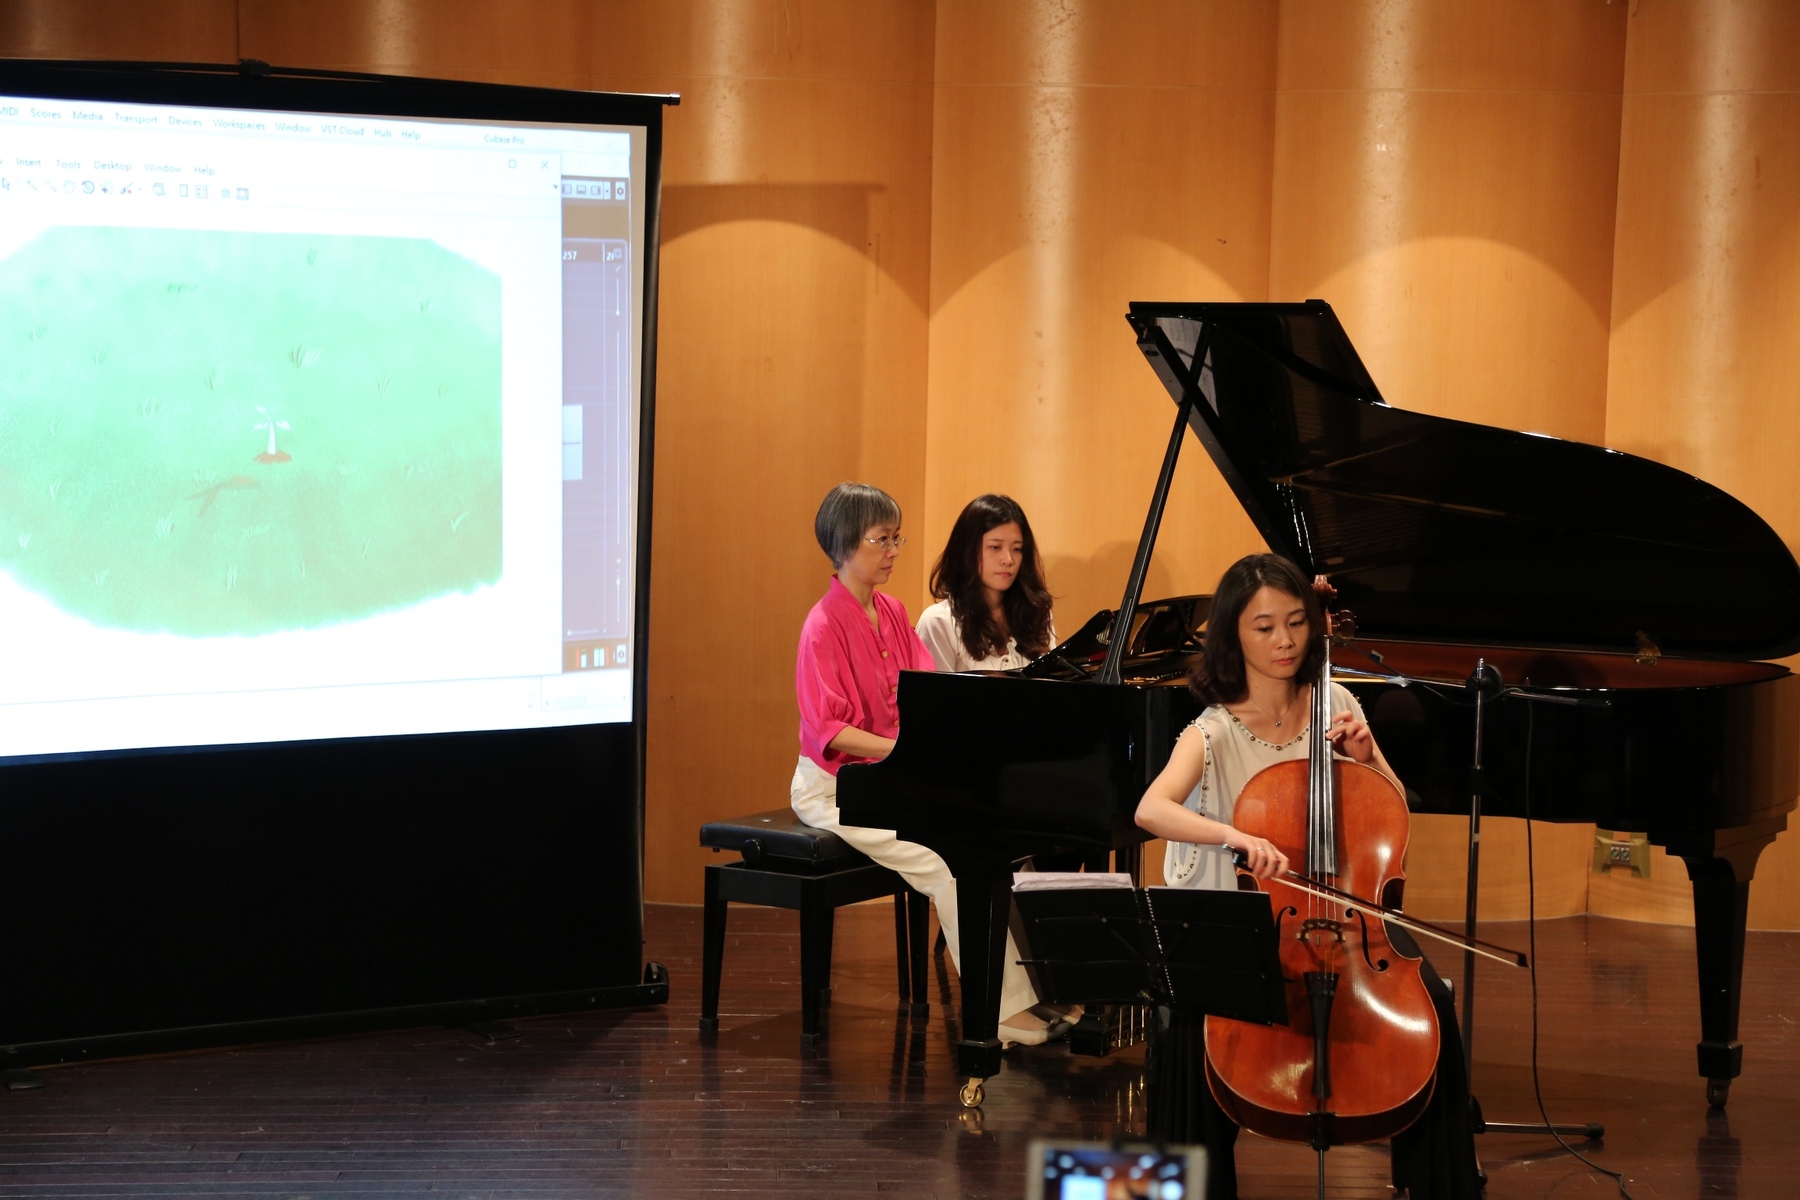 Prof. Kwang-I Ying and Assistant Prof. Jou-An Hou (right) playing the music and animations are triggered and shown on the screen